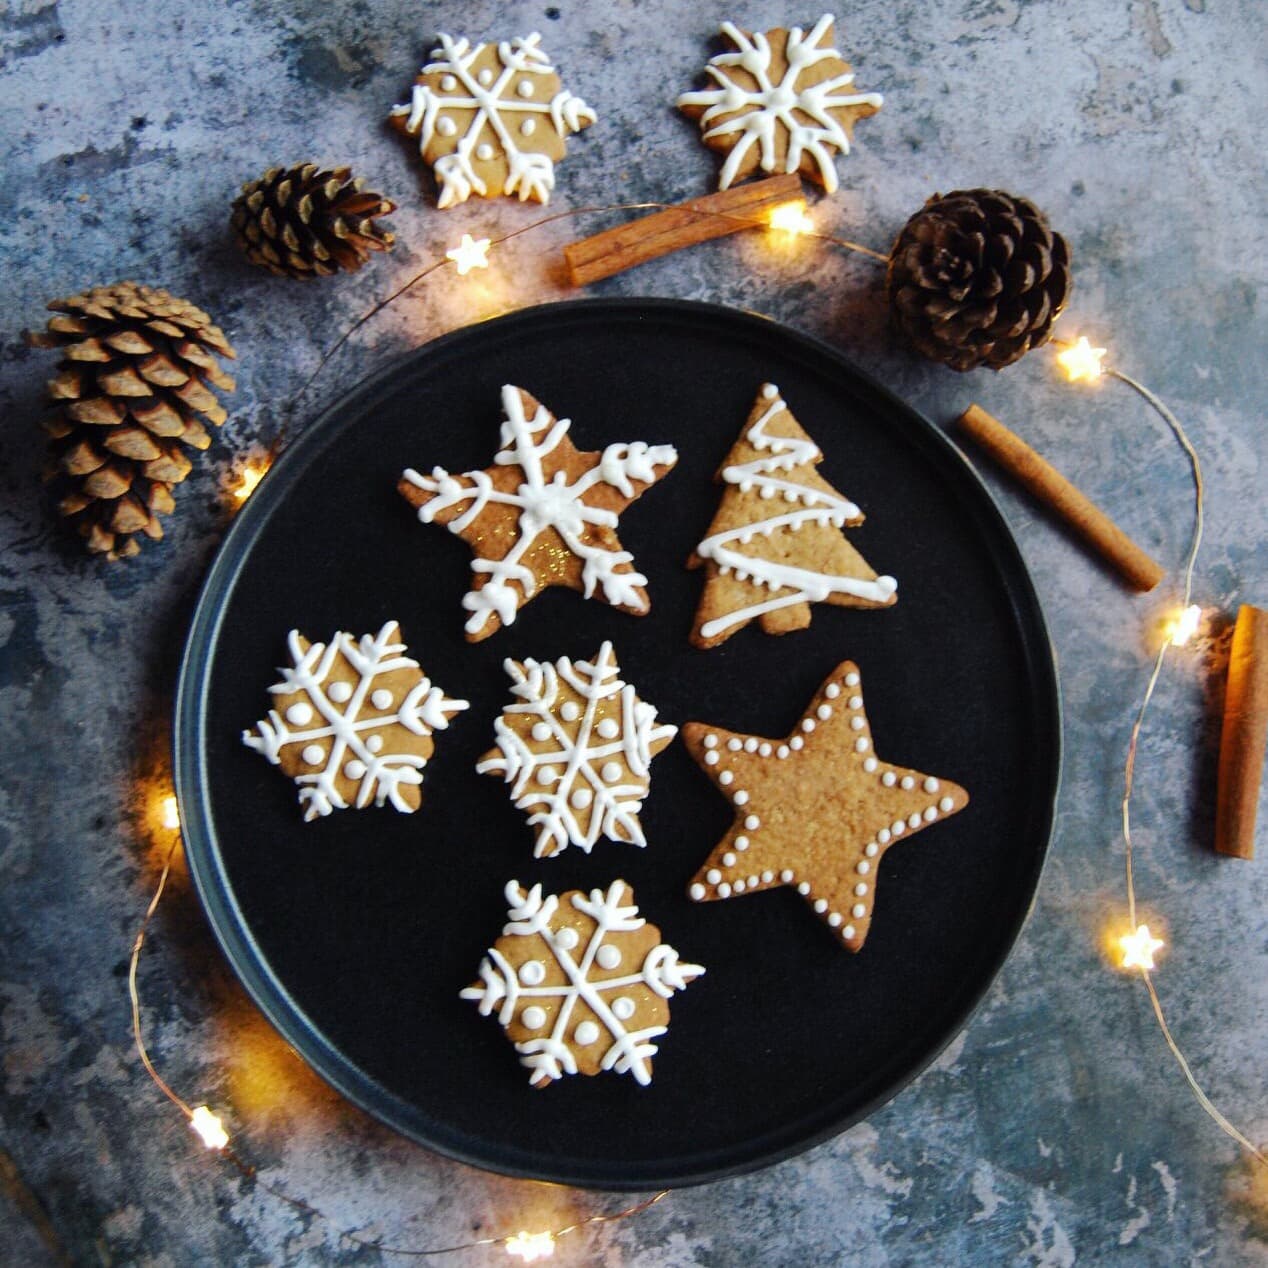 A photo of easy Iced Gingerbread Biscuits on a black plate and grey background with fairy lights, pine cones and cinnamon sticks